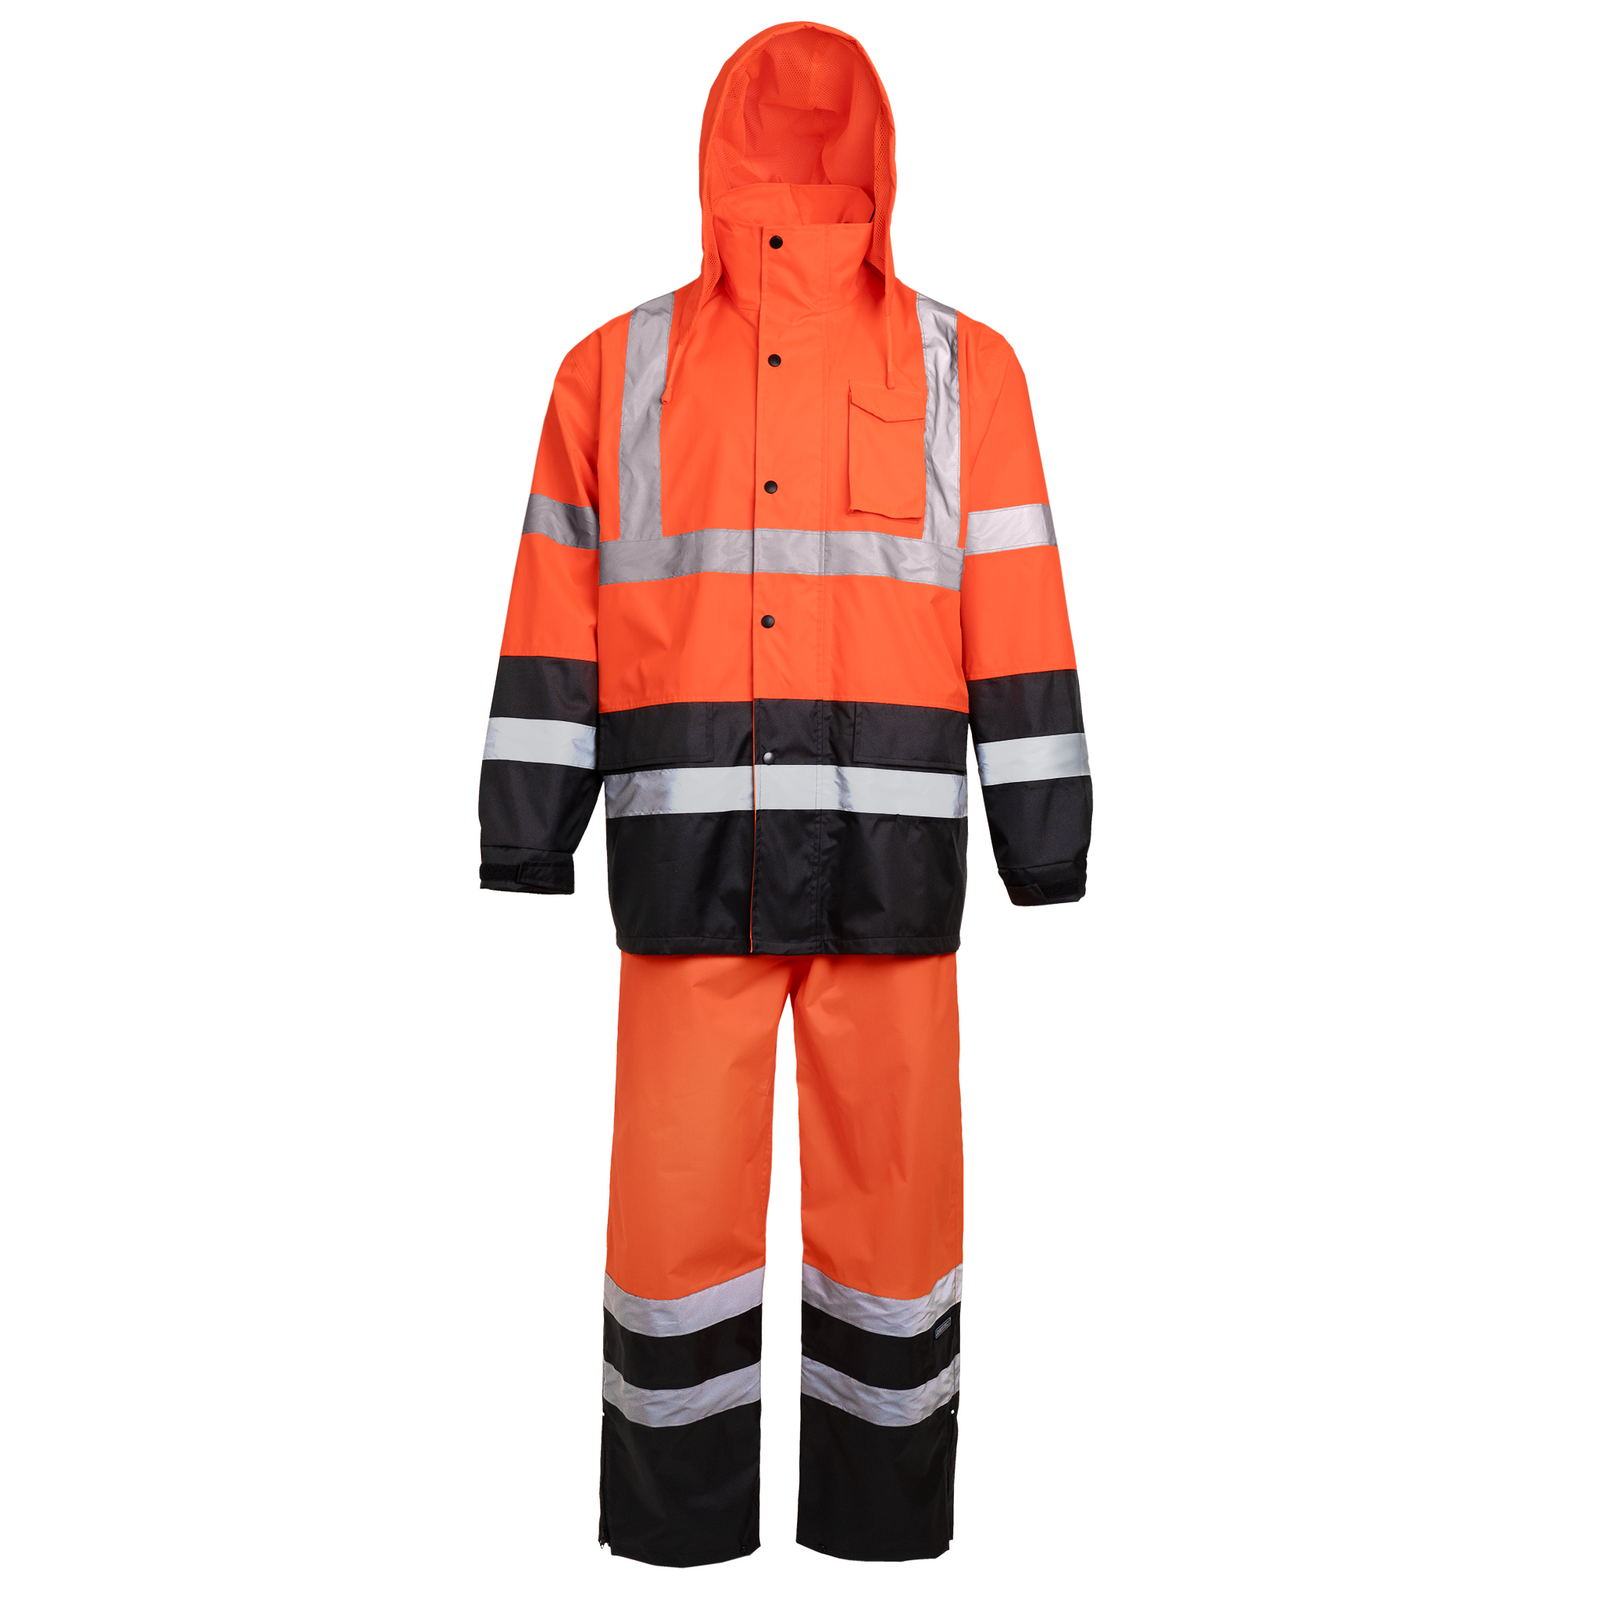 High Visibility Orange and Black Safety rain set with 2 inches reflective stripes